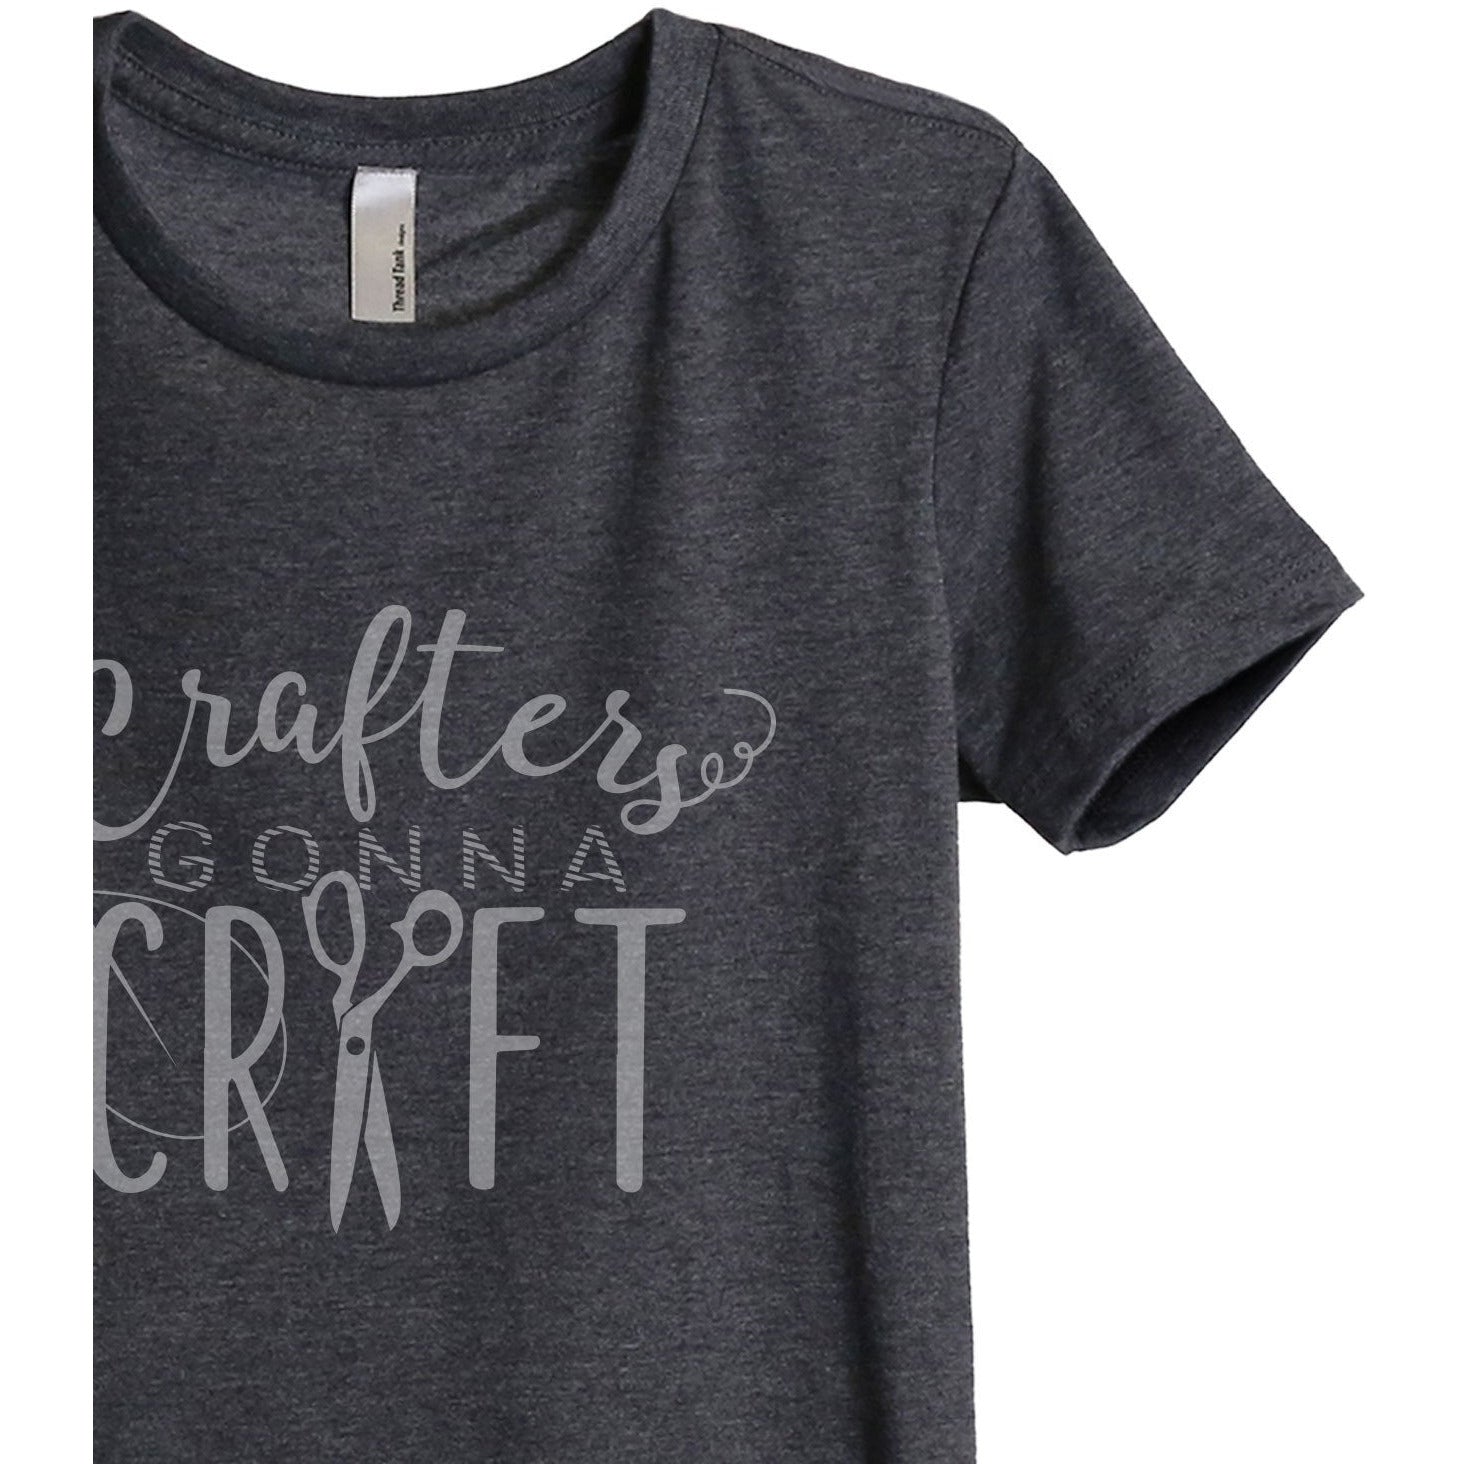 Crafters Gonna Craft Women's Relaxed Crewneck T-Shirt Top Tee Charcoal Grey Zoom Details